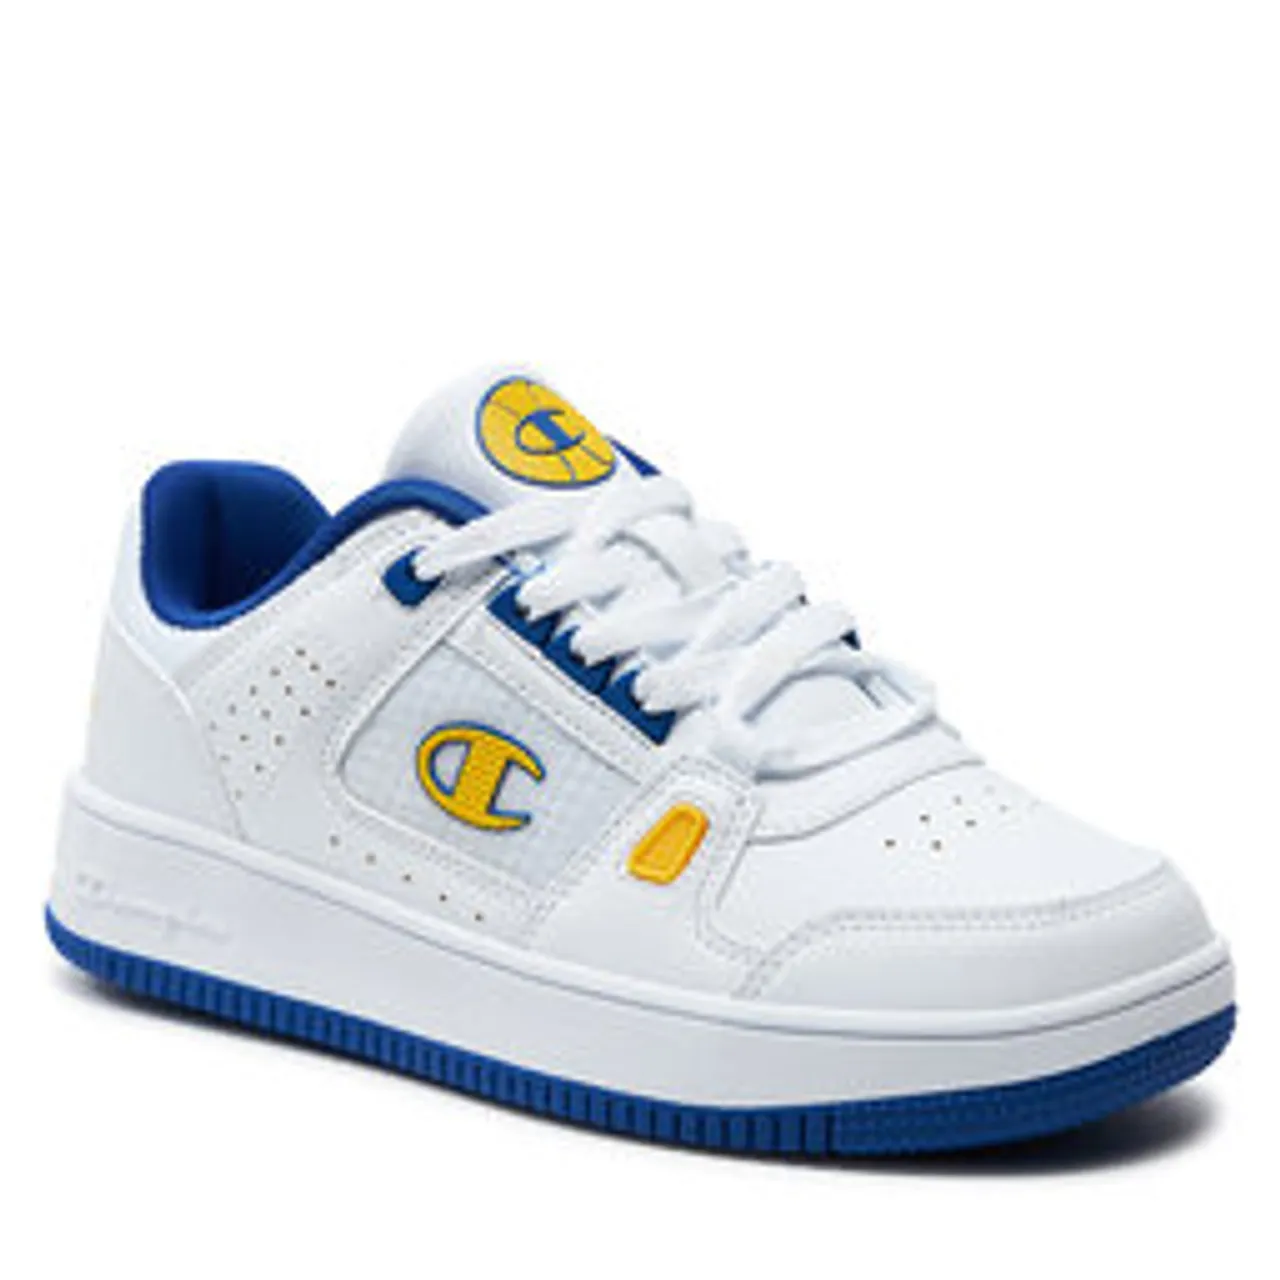 Sneakers Champion Rebound Summerized Low B Gs S32876-CHA-WW008 Wht/Rbl/Yellow